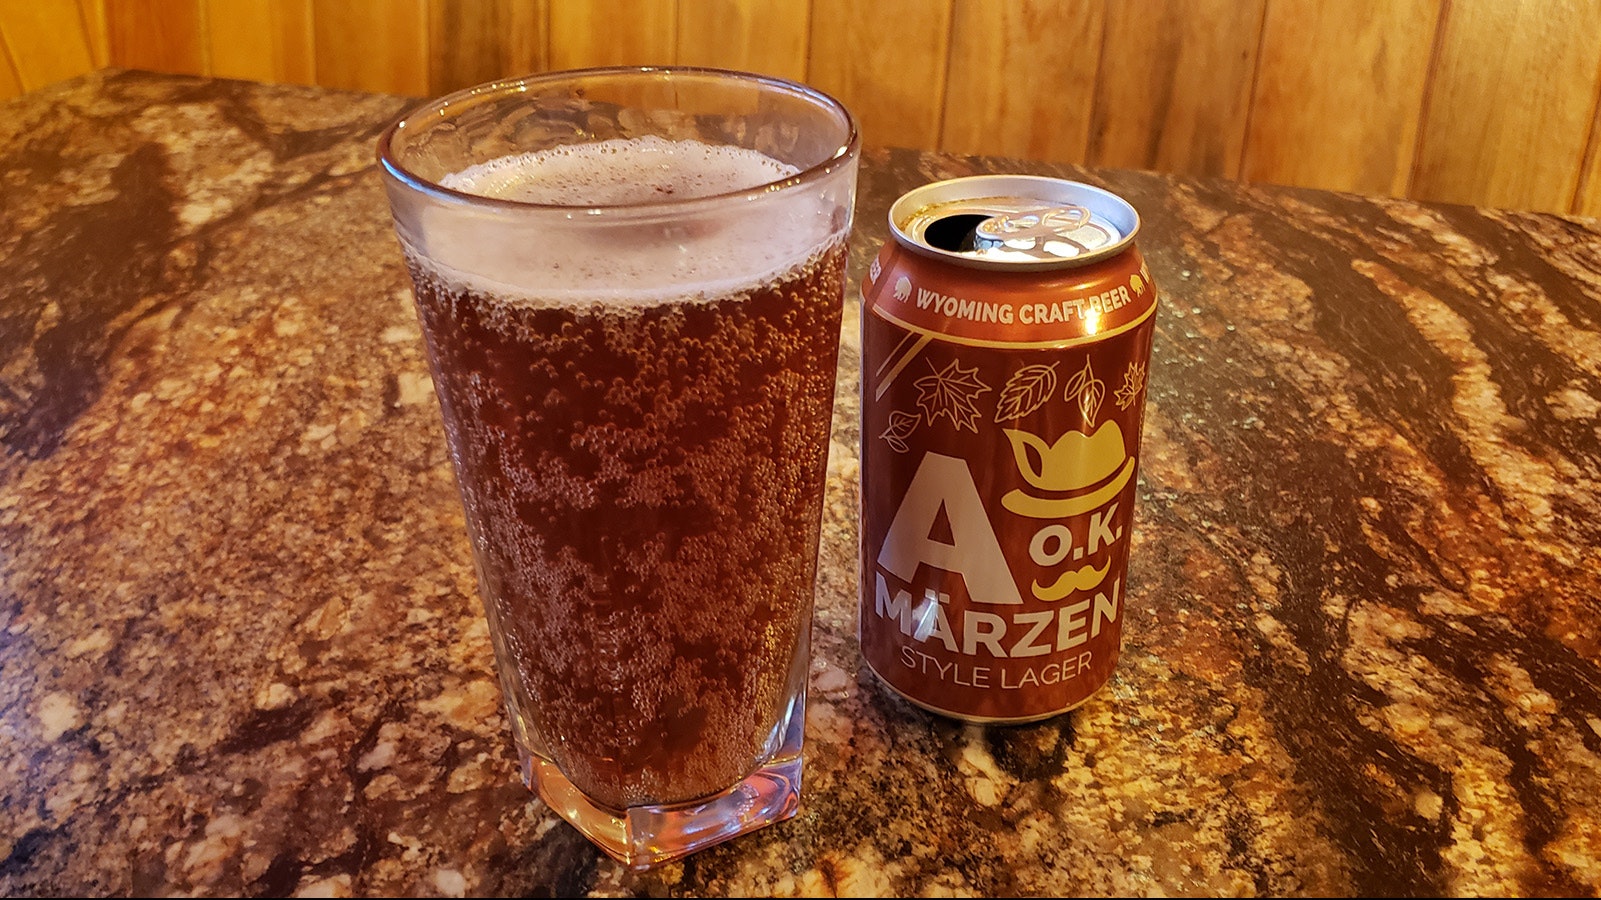 The A-O.K. Marzen is one of several Wyoming craft beers available at Michael's Big City Steakhouse.